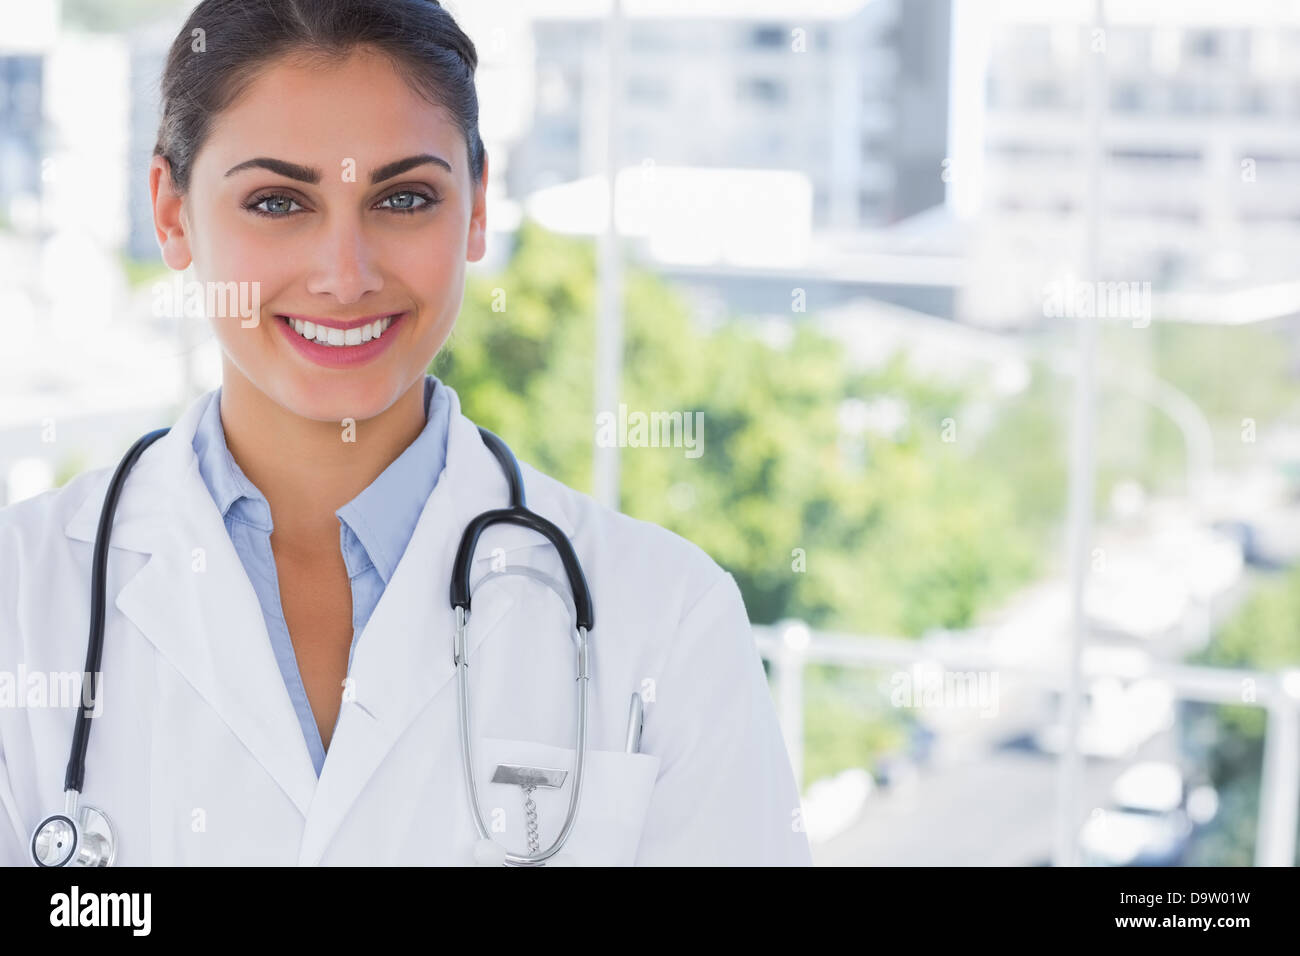 Pretty young doctor Stock Photo - Alamy